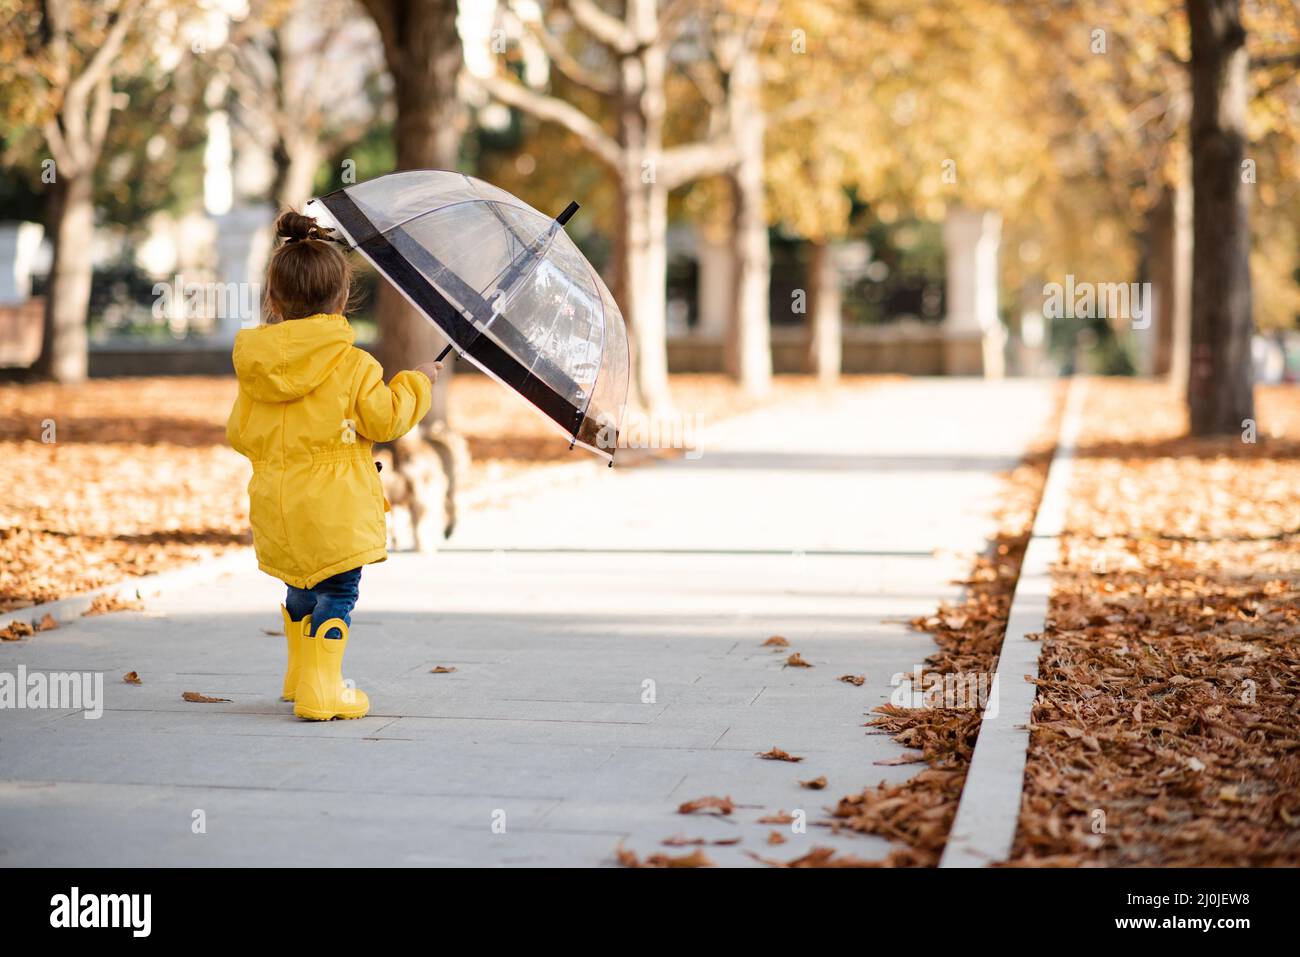 Funny kid girl 2-3 year old wear yellow bright raincoat, rubber boots hold umbrella walk in park over fallen leaves outdoors. Autumn season. Back view Stock Photo